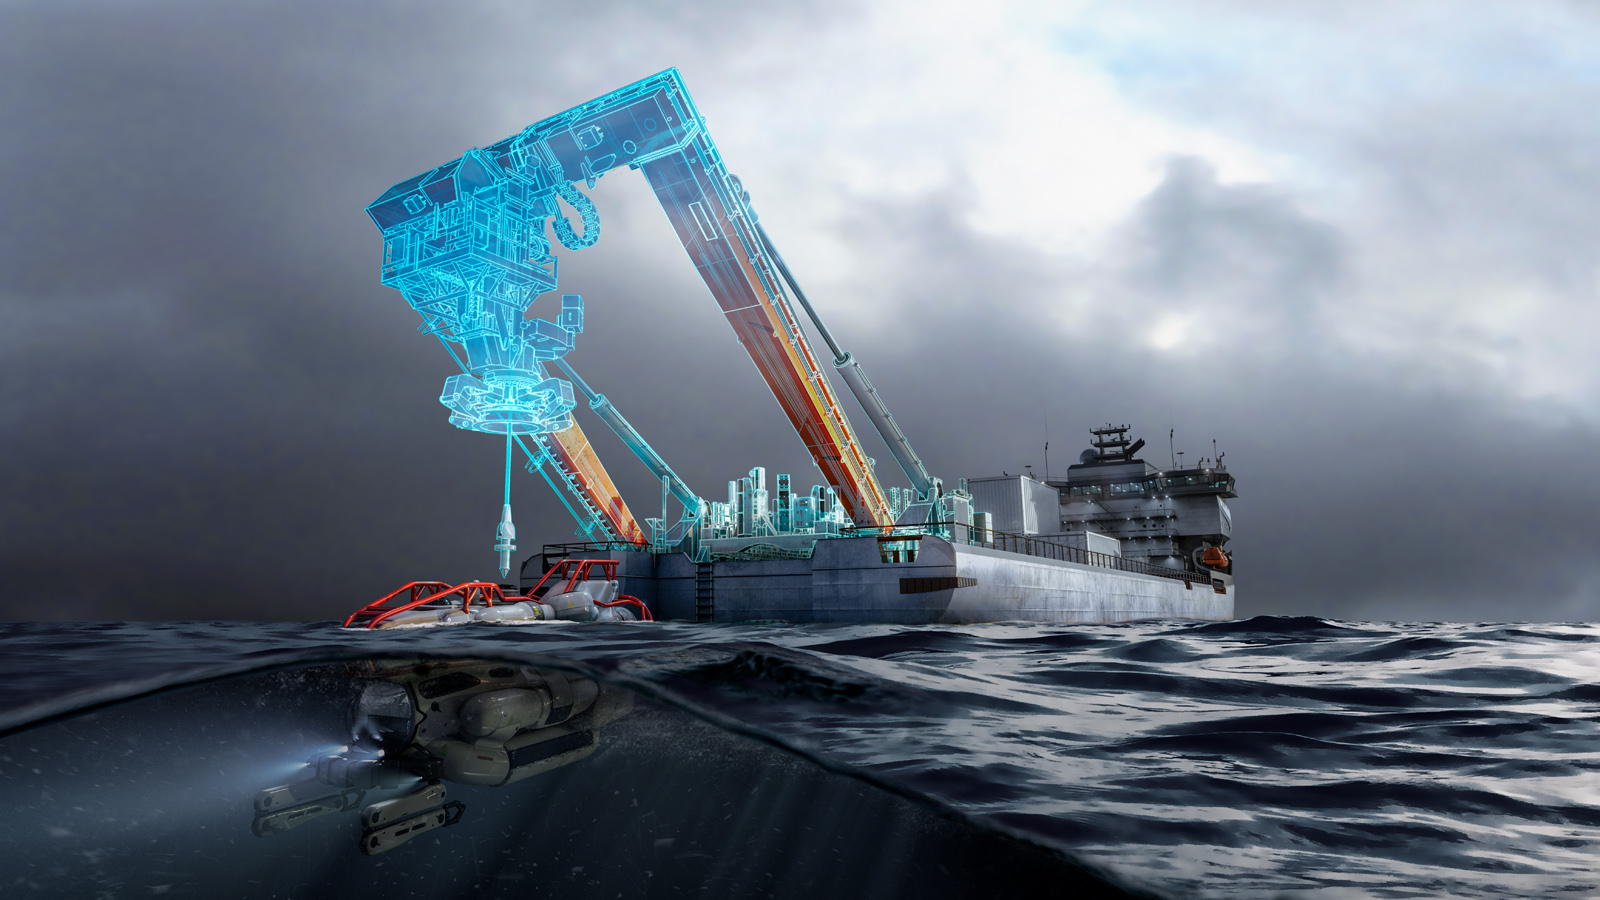 artist impression of navy vessel with launch and recovery system